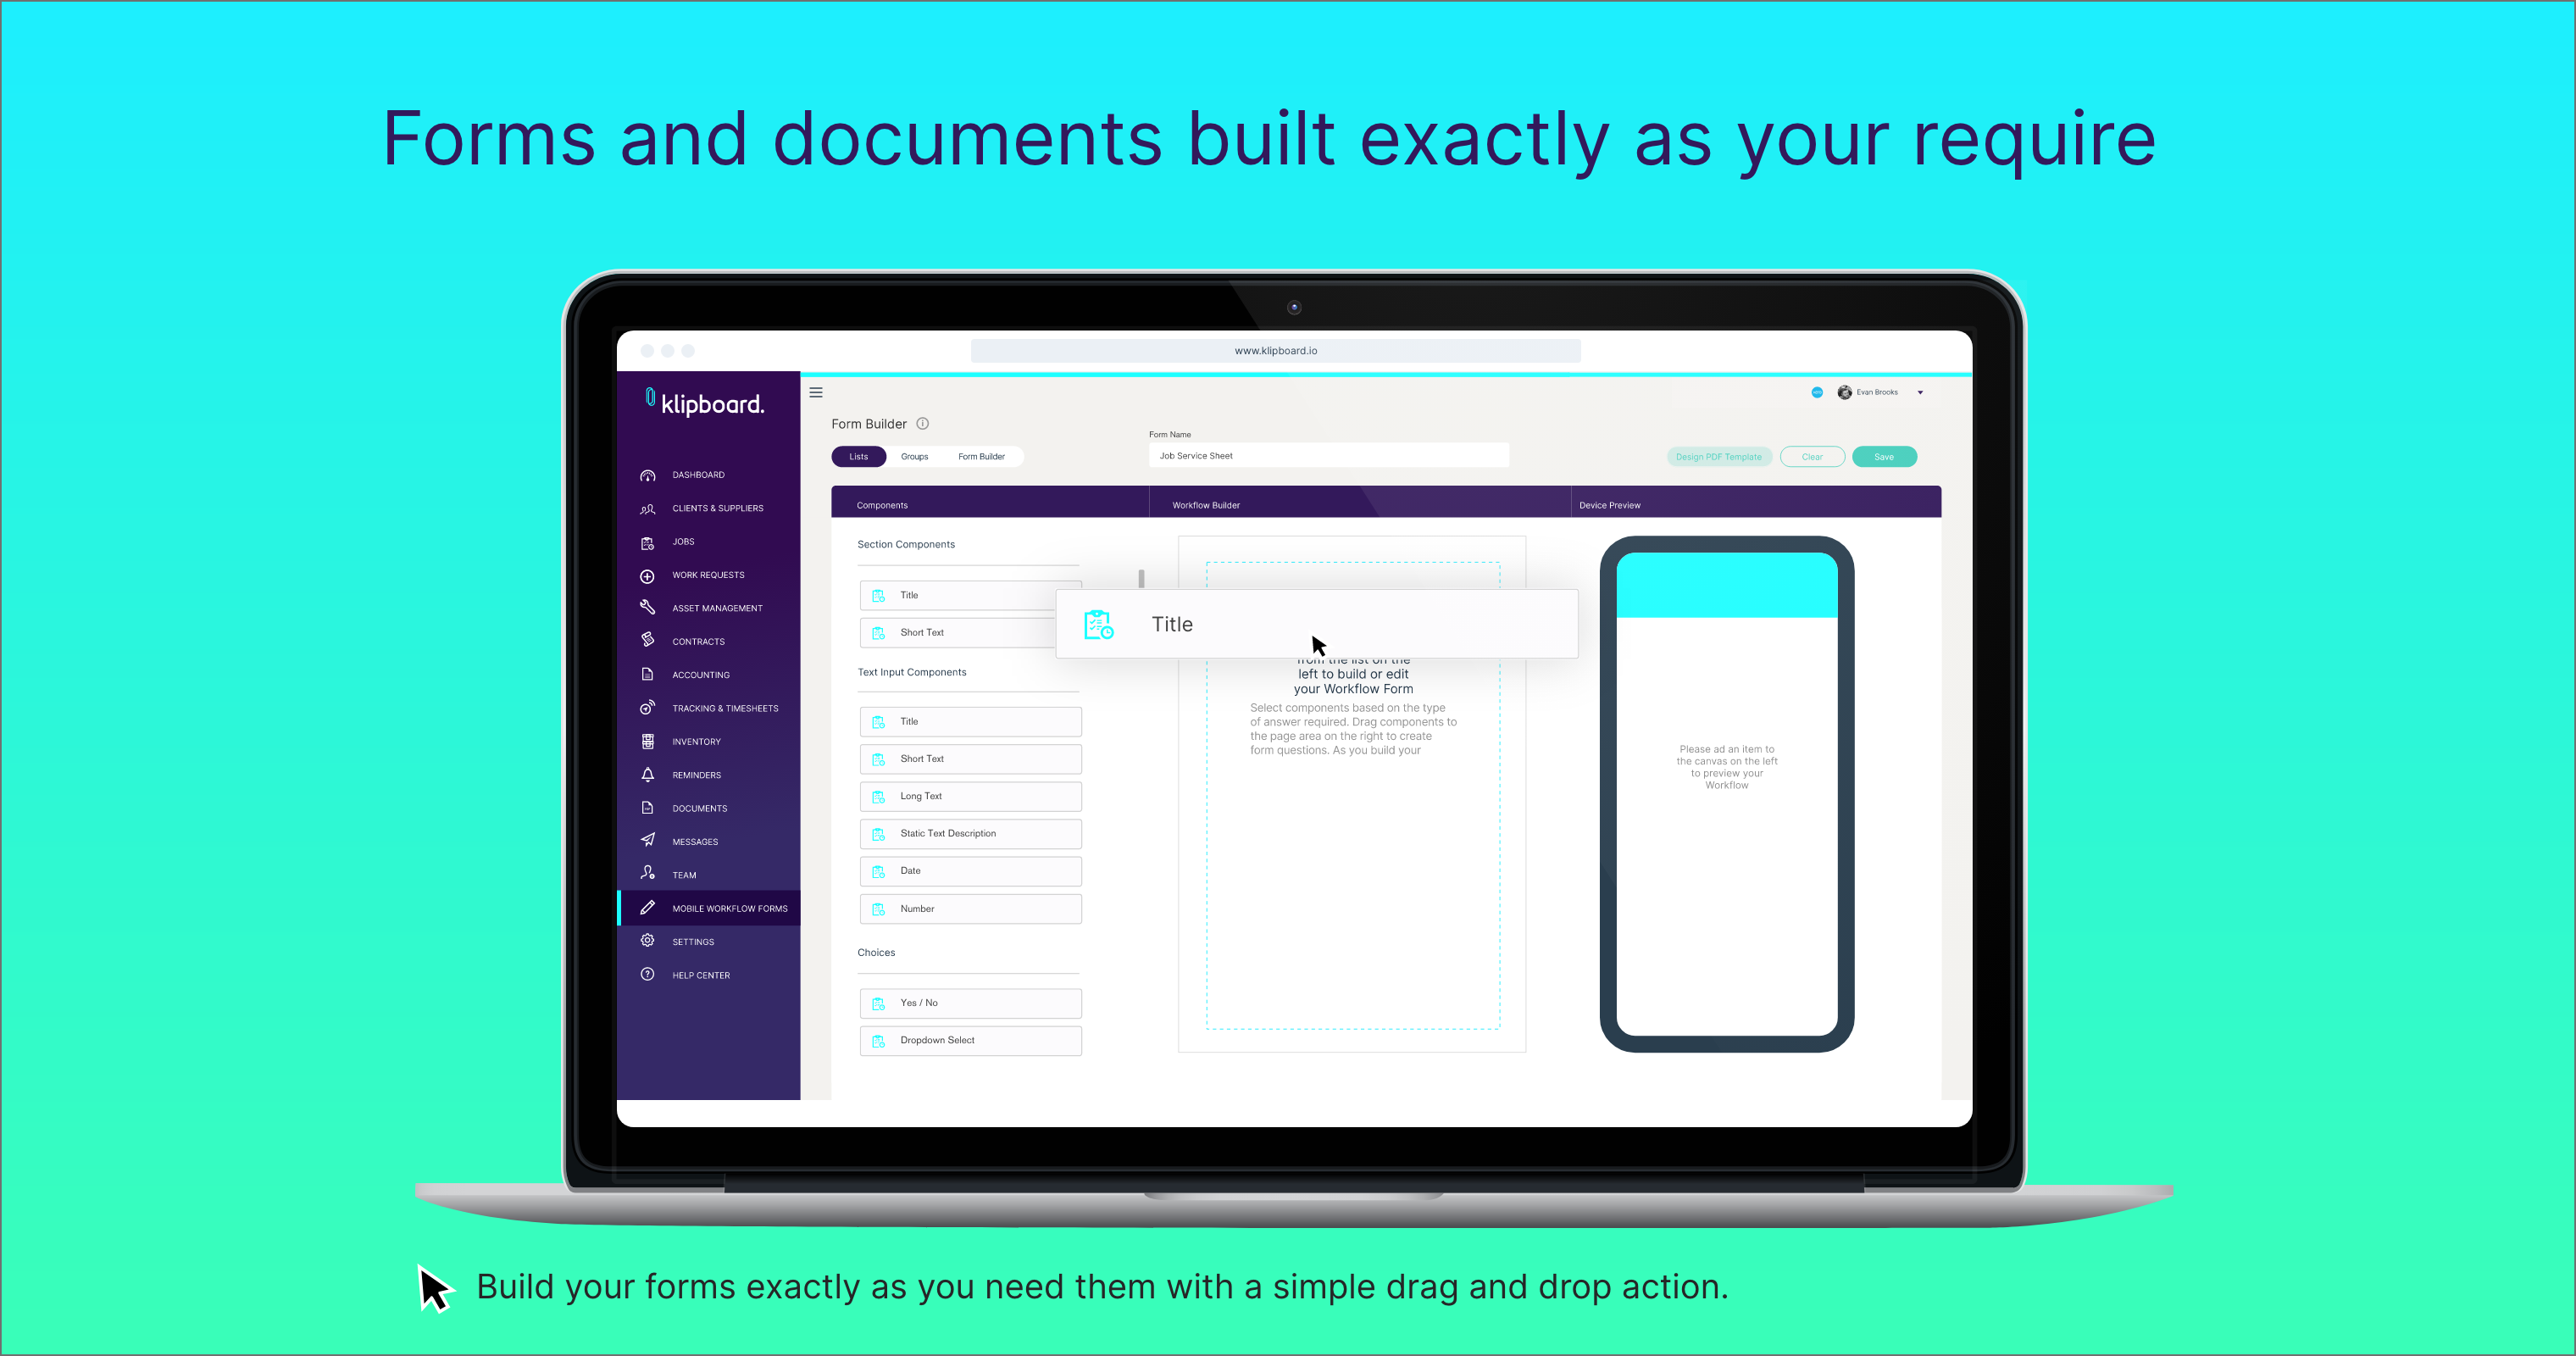 Klipboard Software - Build any form your team needs in the field with ease